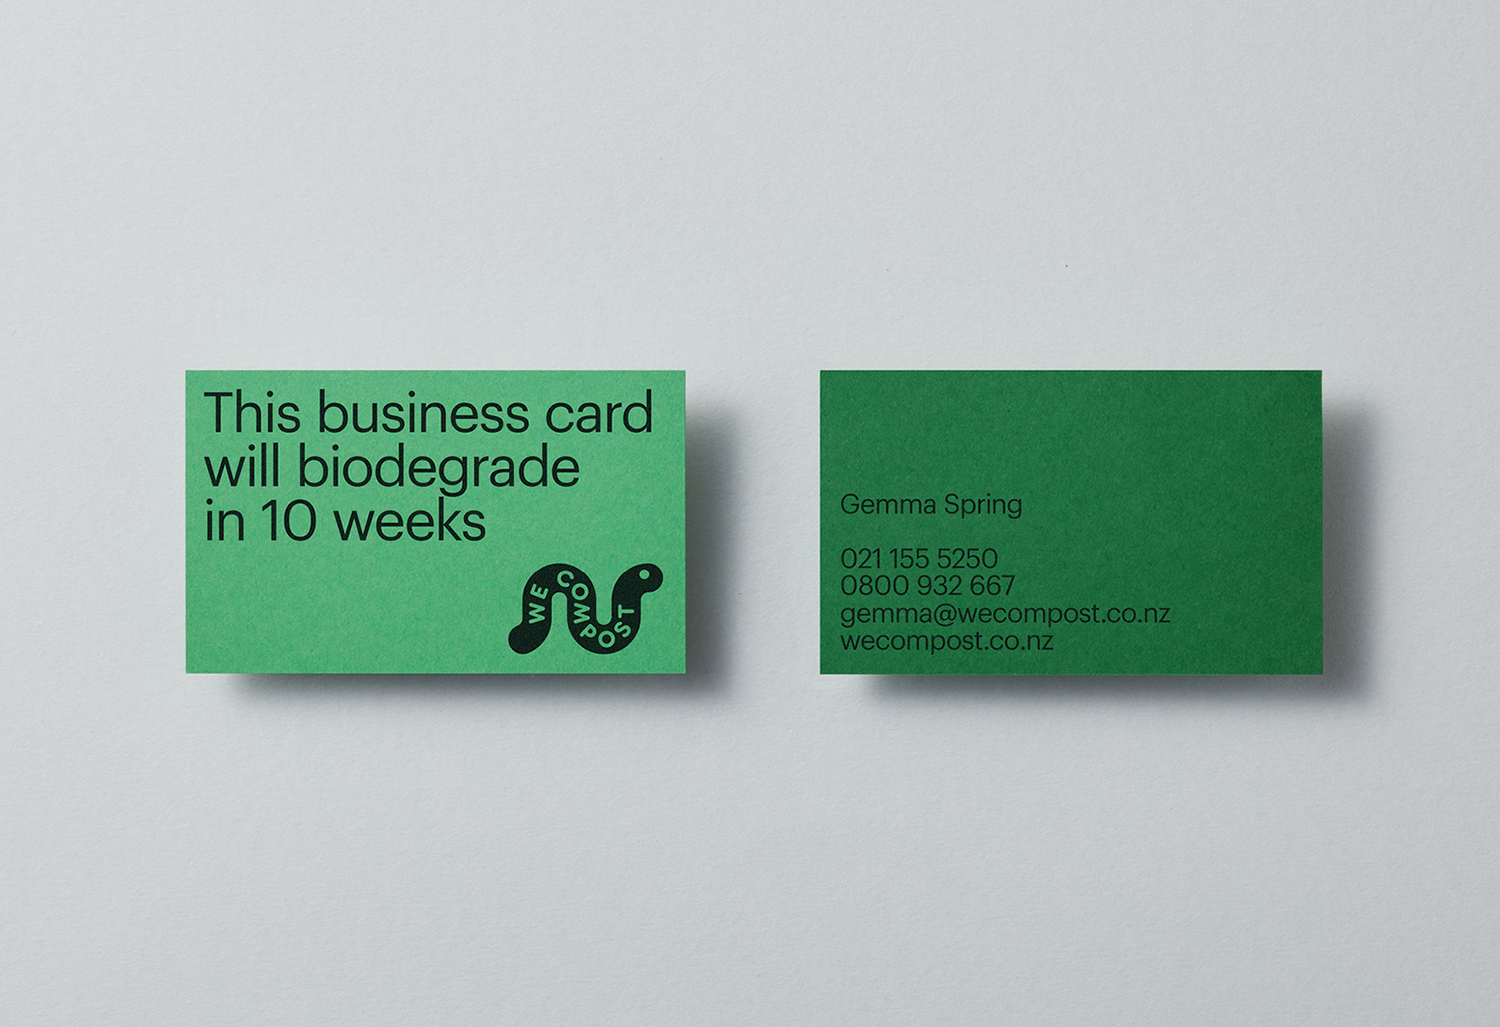 Logo and business cards designed by Seachange for leading commercial compostable waste collection service We Compost